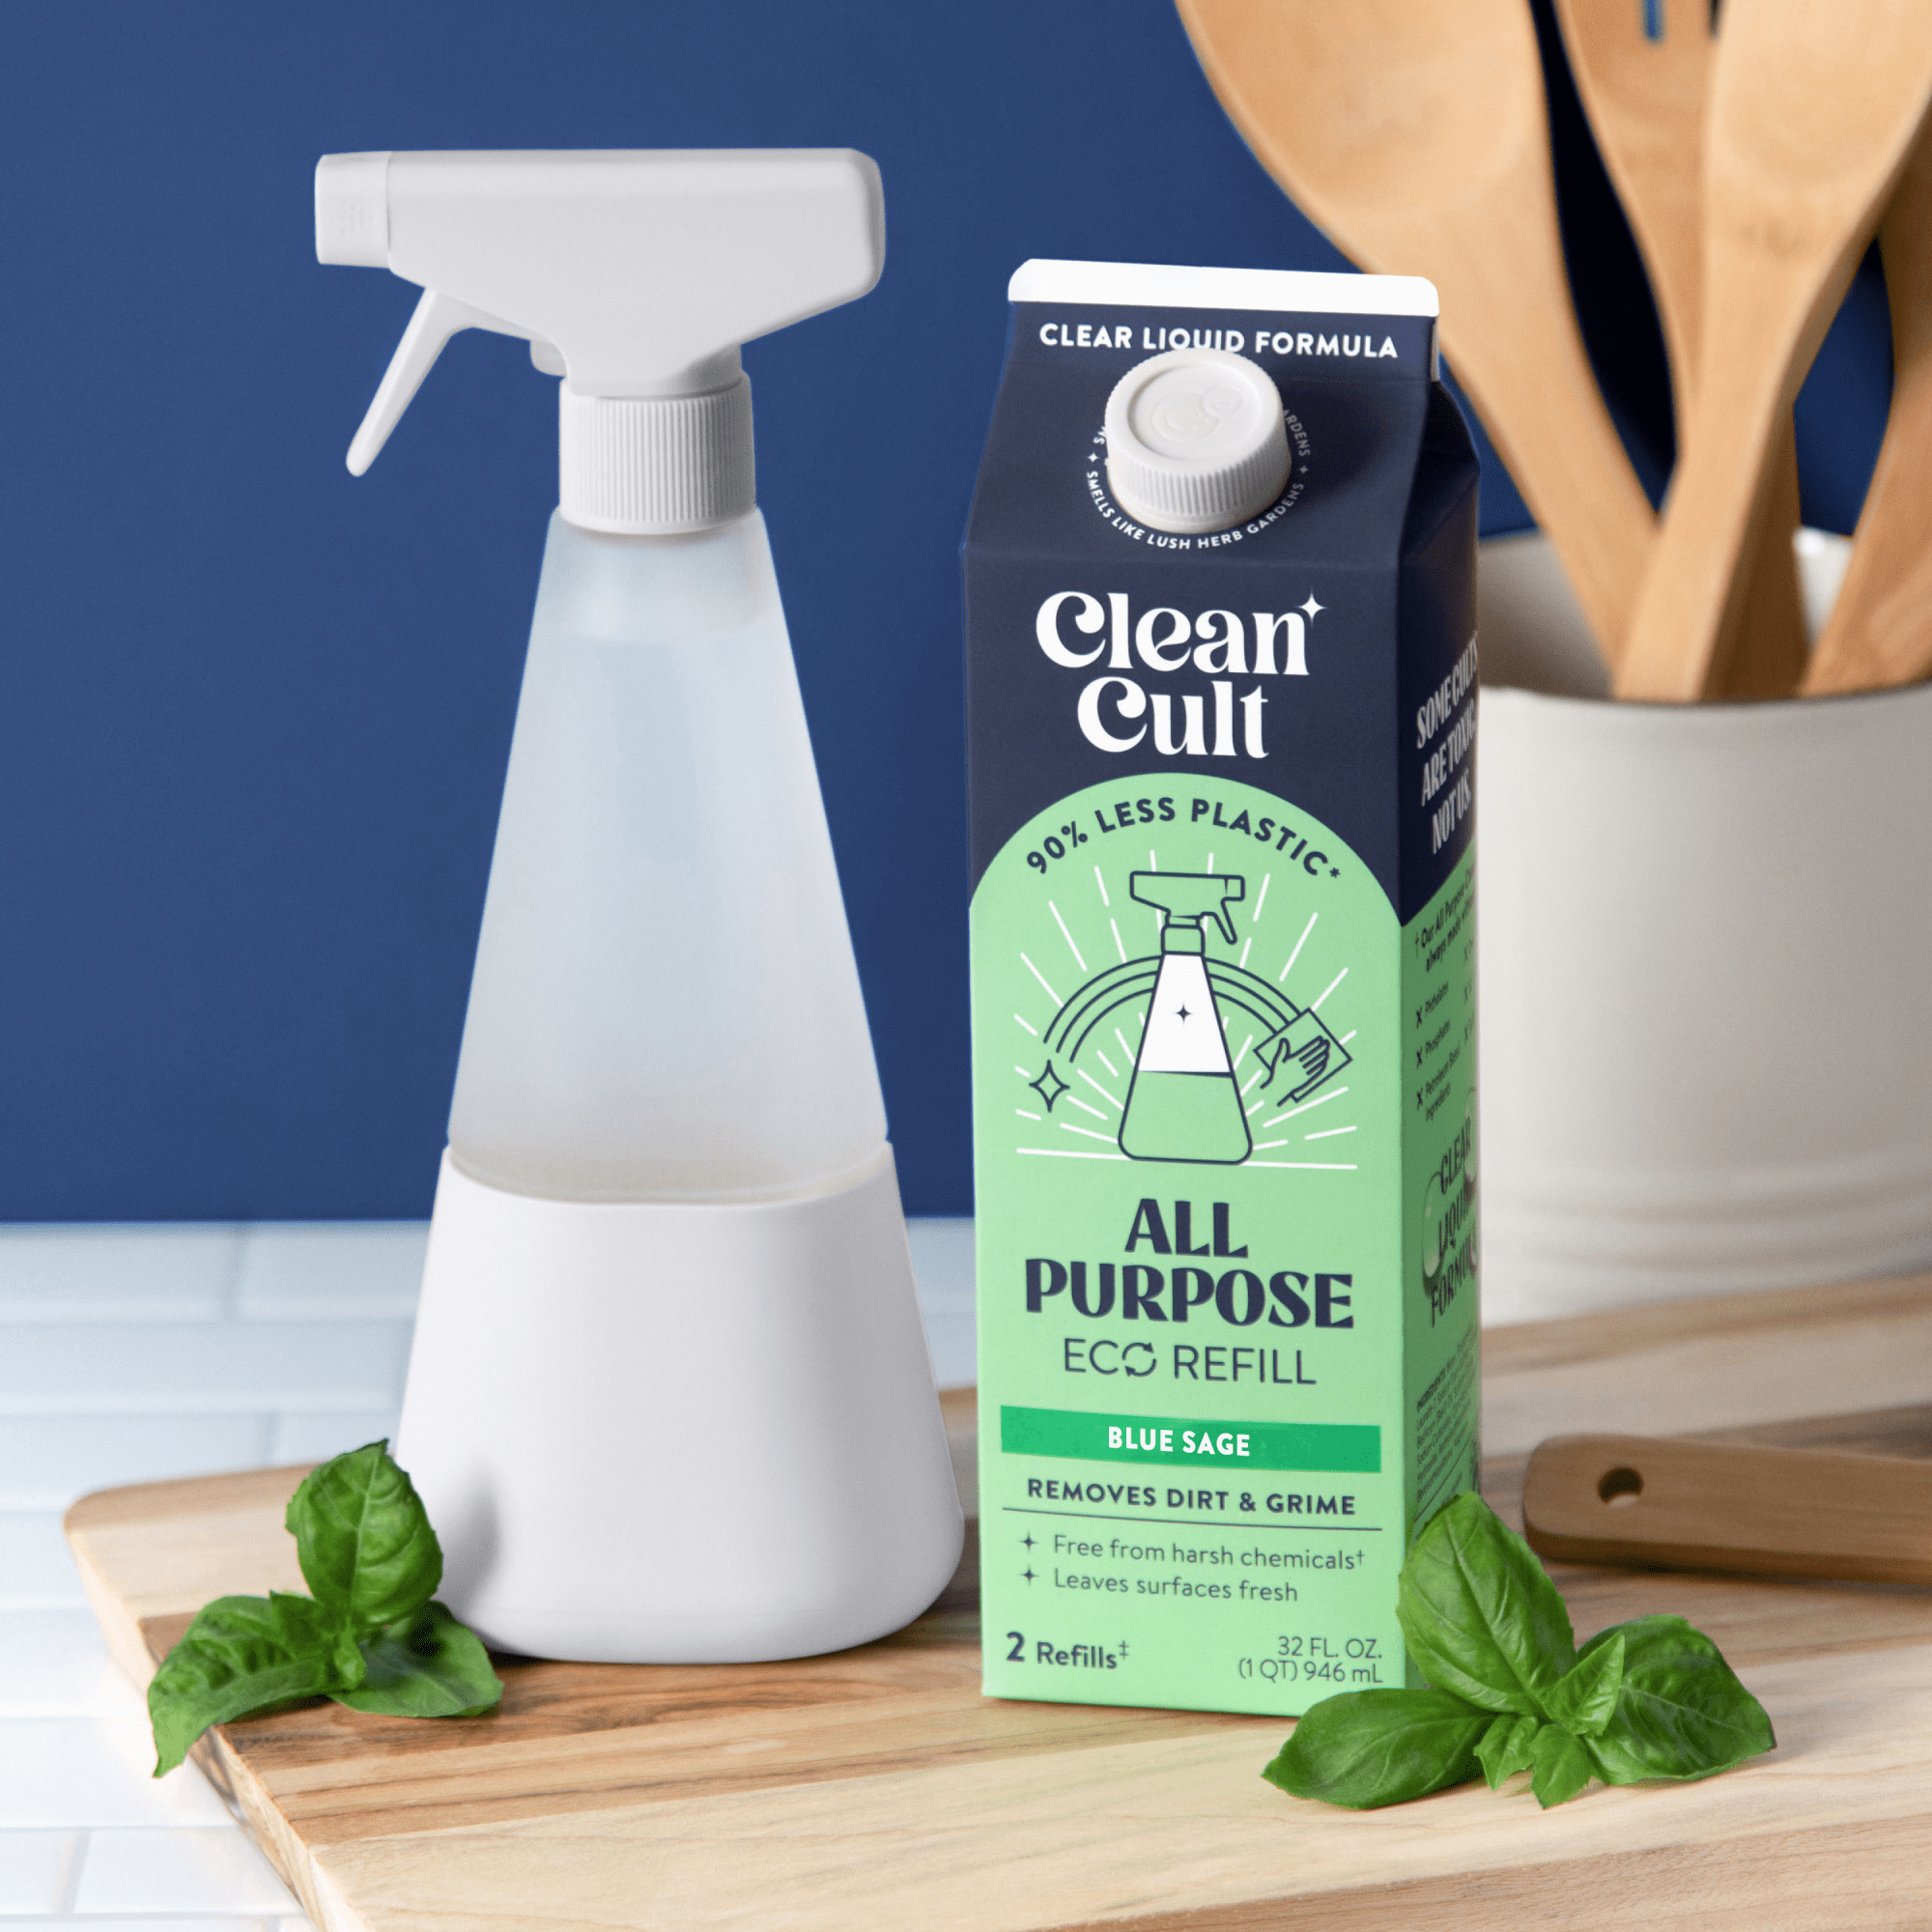 City Maid Green Multipurpose Cleaner Concentrate Sage